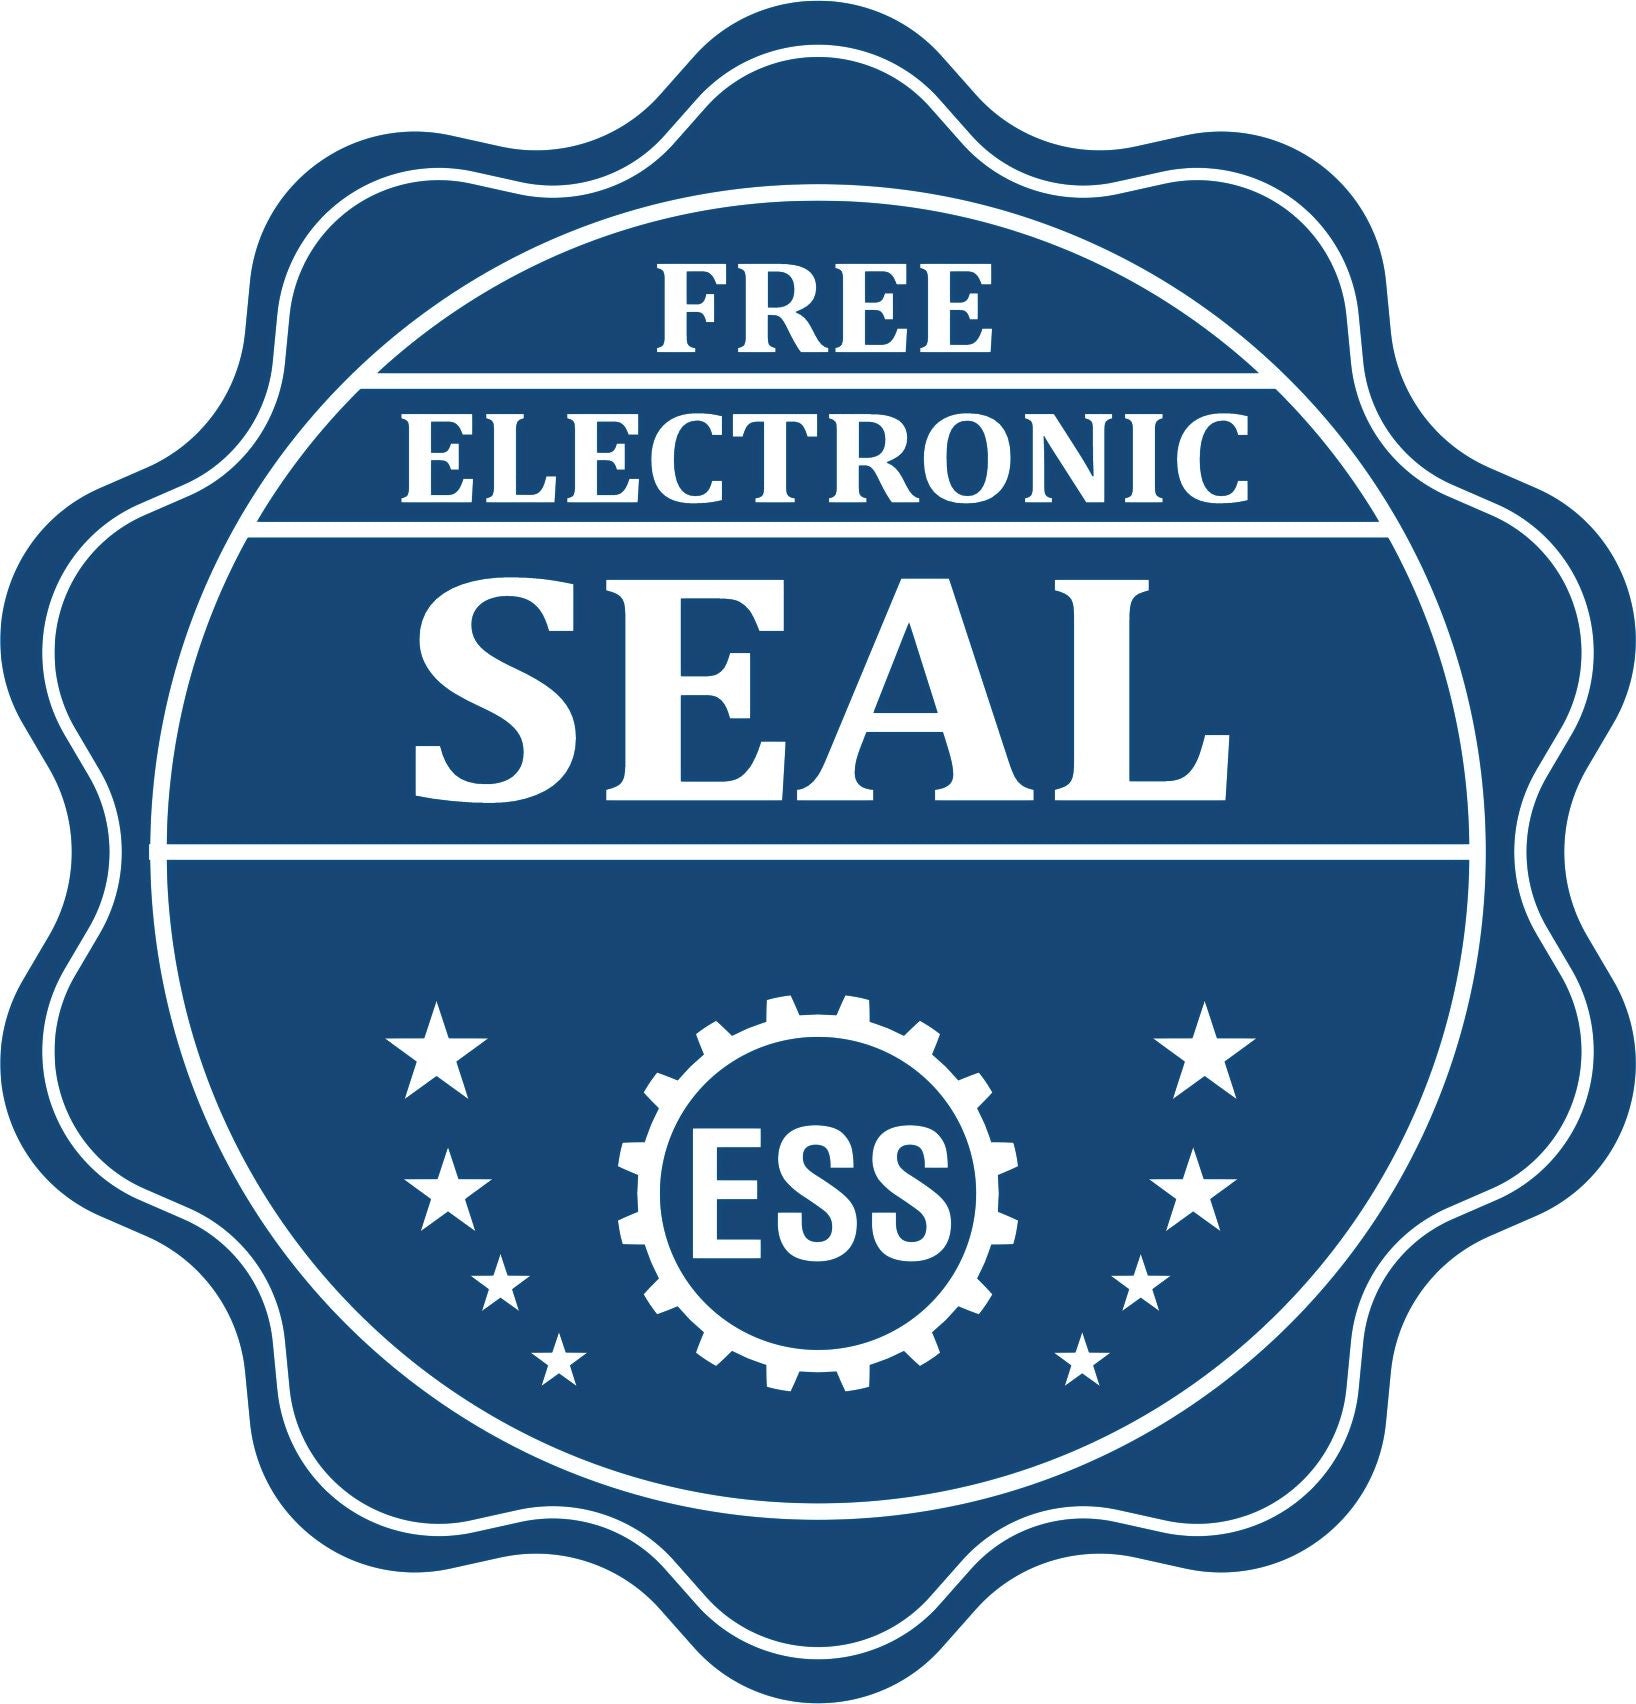 A badge showing a free electronic seal for the Hybrid New Jersey Landscape Architect Seal with stars and the ESS gear on the emblem.